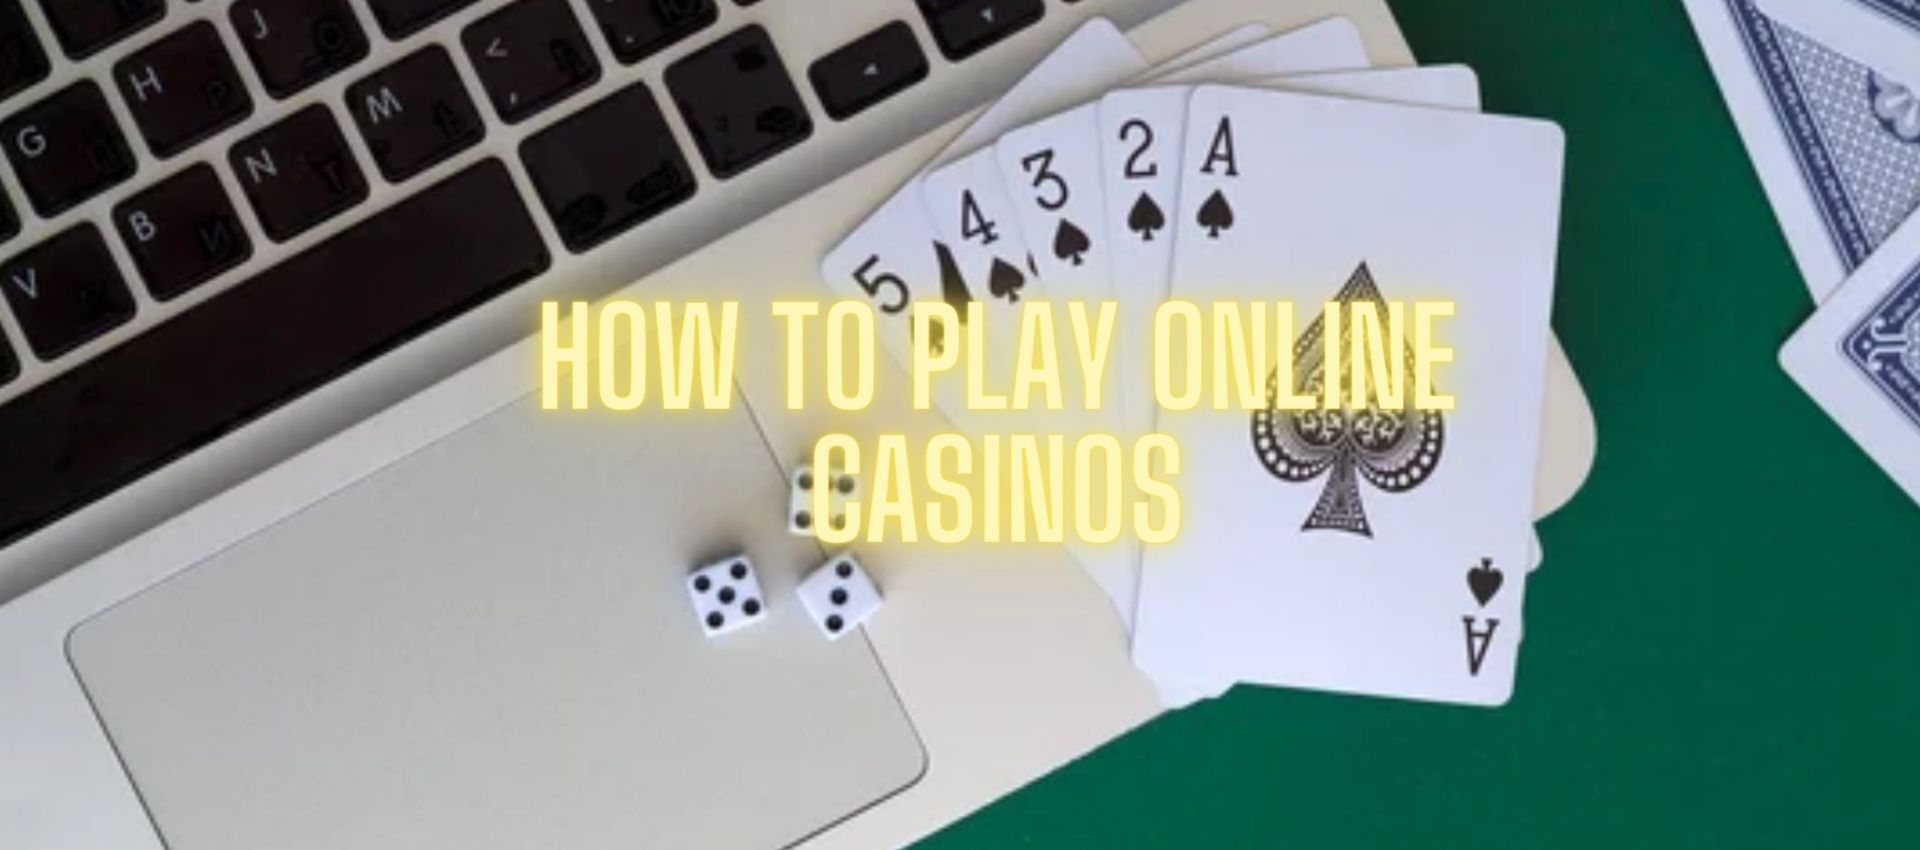 How to play online casinos?